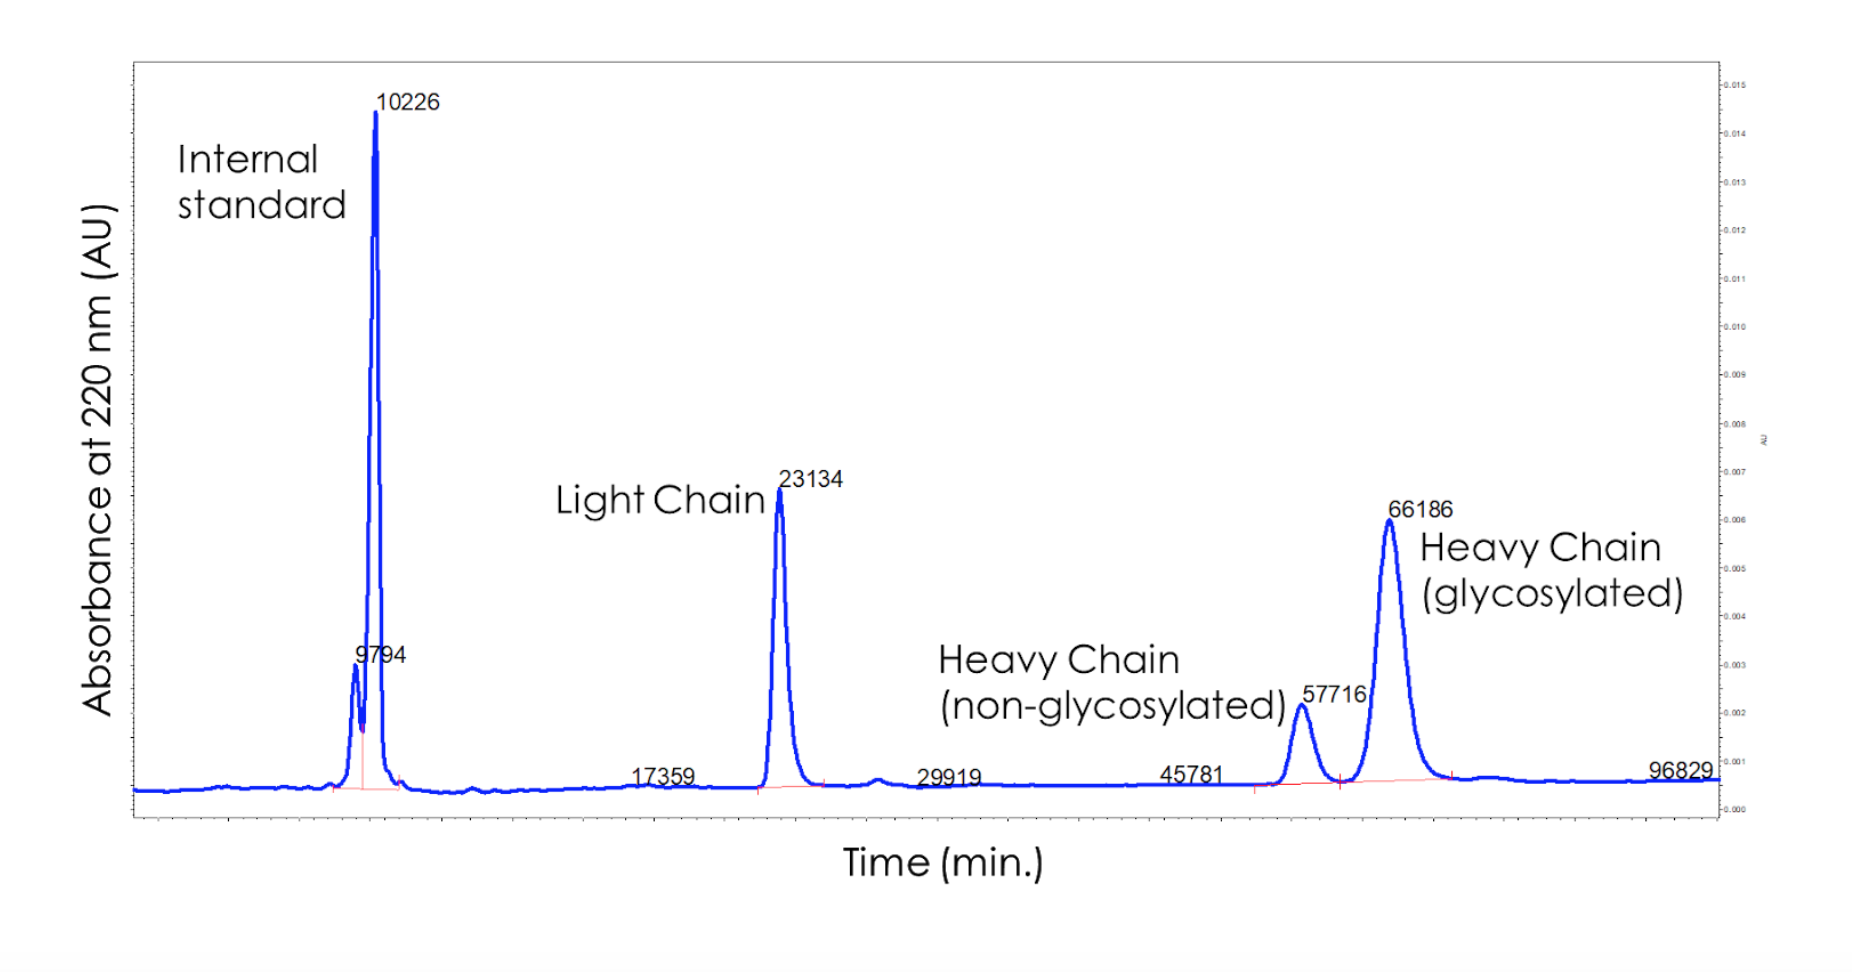 Line graph. Absorbance at 220 nm (AU) on y-axis from 0.000-0.015, increments of 0.001. Time (min) on x-axis. High absorbency peaks indicate LC and HC and can distinguish HC non-glycosylated from HC glycosylated. Then compares these to the internal standard.